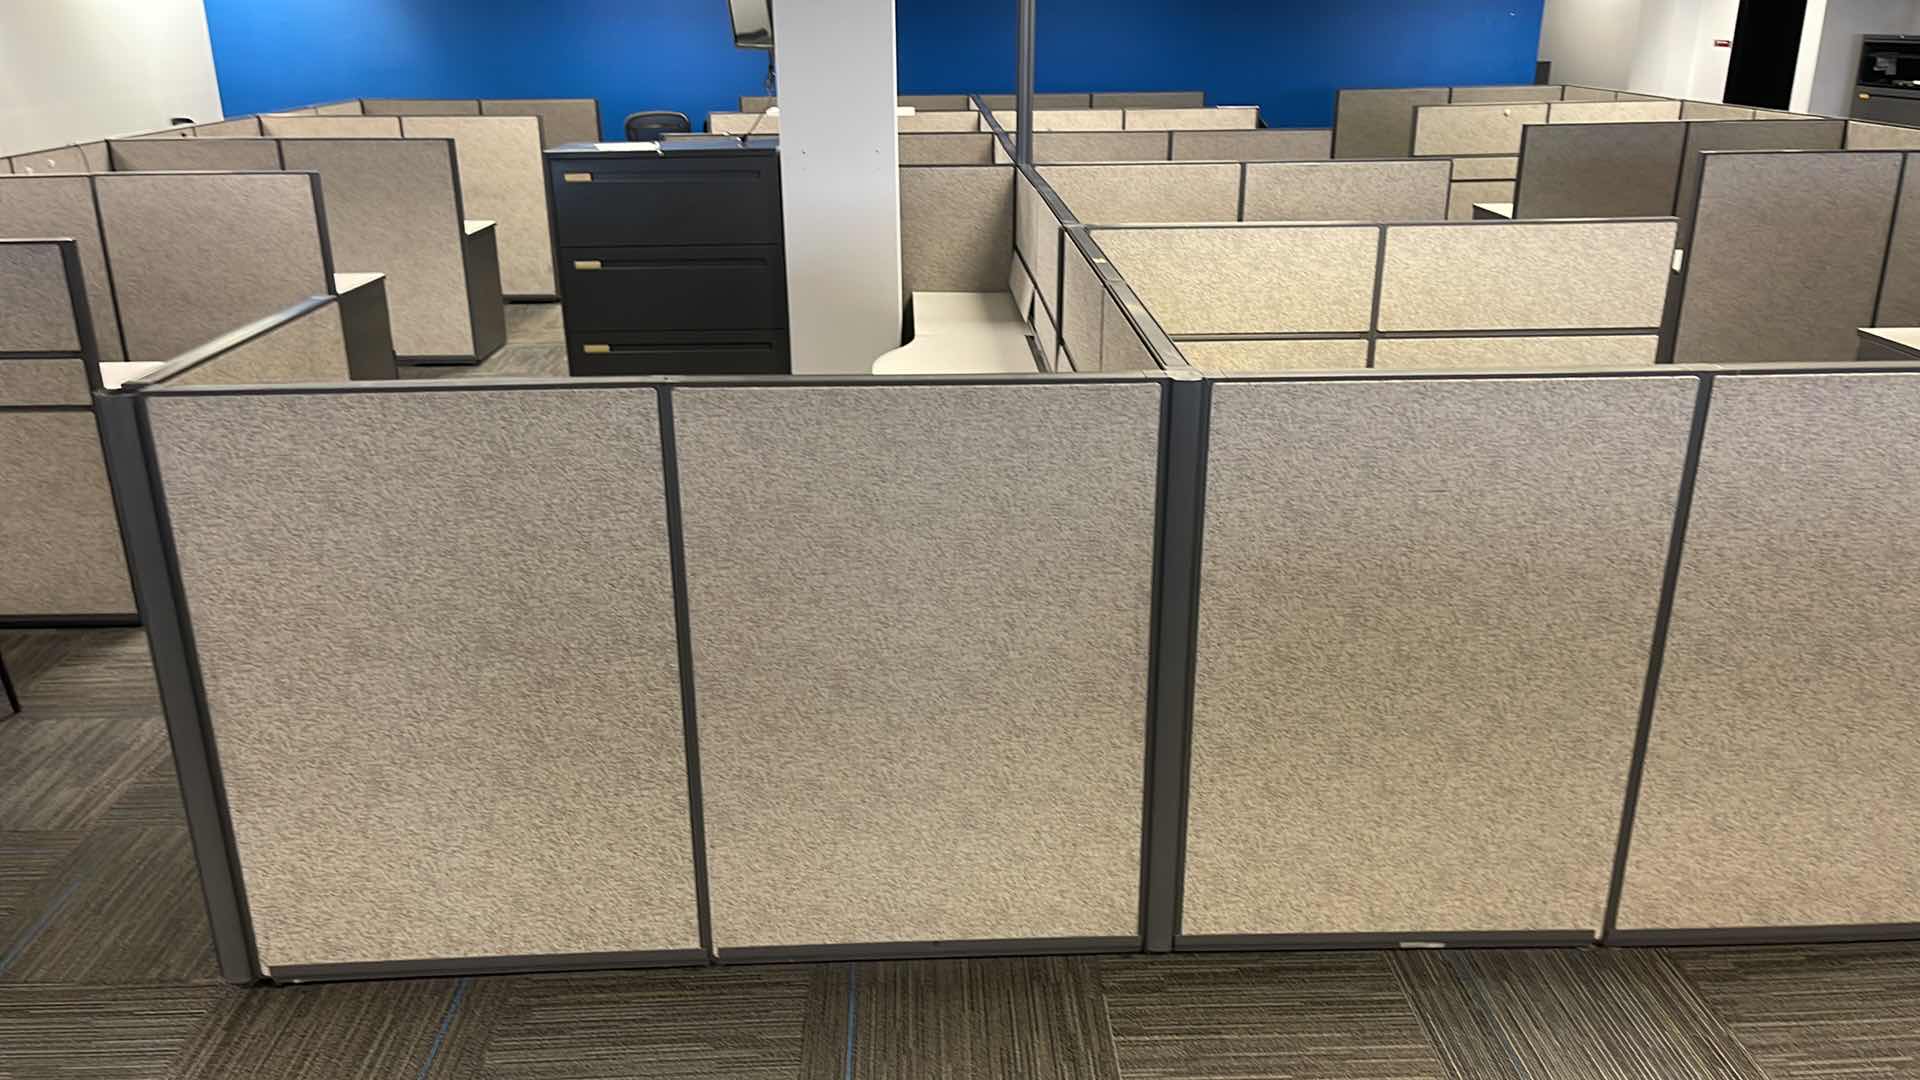 Photo 1 of 3 PC CUBICLE SET W 5 DRAWER MEDAL BASE DESKS 2 CUBICLES 76” X 76�” H50” 1 CUBICLE 12’ X 76” H50”(BUYER TO DISASSEMBLE & REMOVE FROM 2ND STORY OFFICE BUILDING W ELEVATOR)